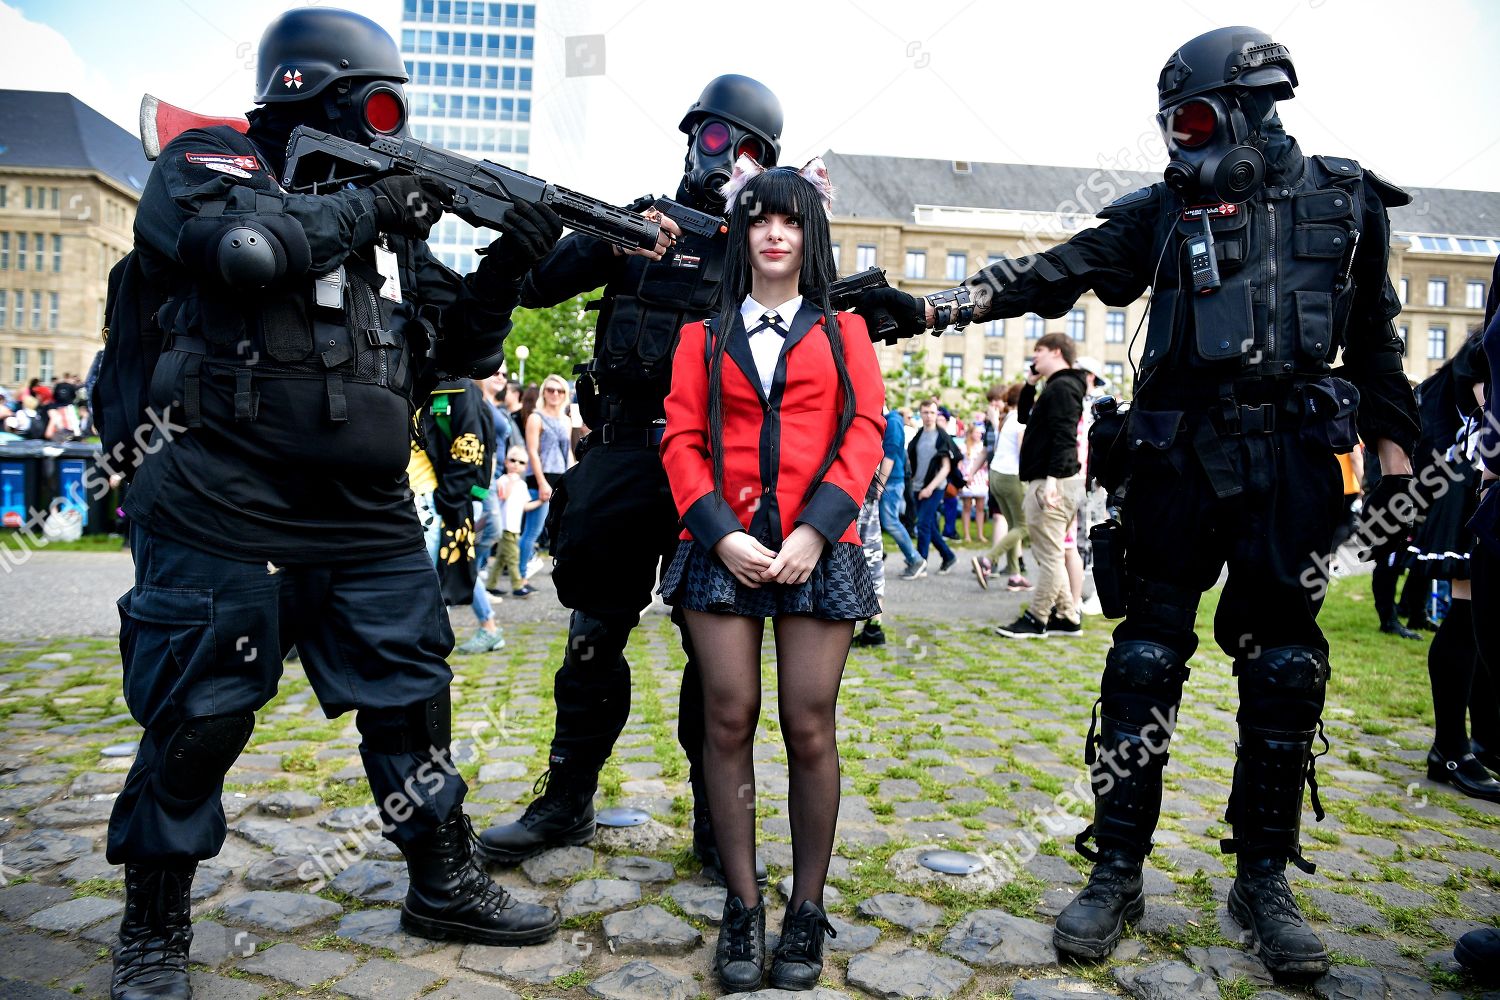 Grab Peck Patience Resident Evil Umbrella Corp Costumed Cosplayers Editorial Stock Photo -  Stock Image | Shutterstock Editorial